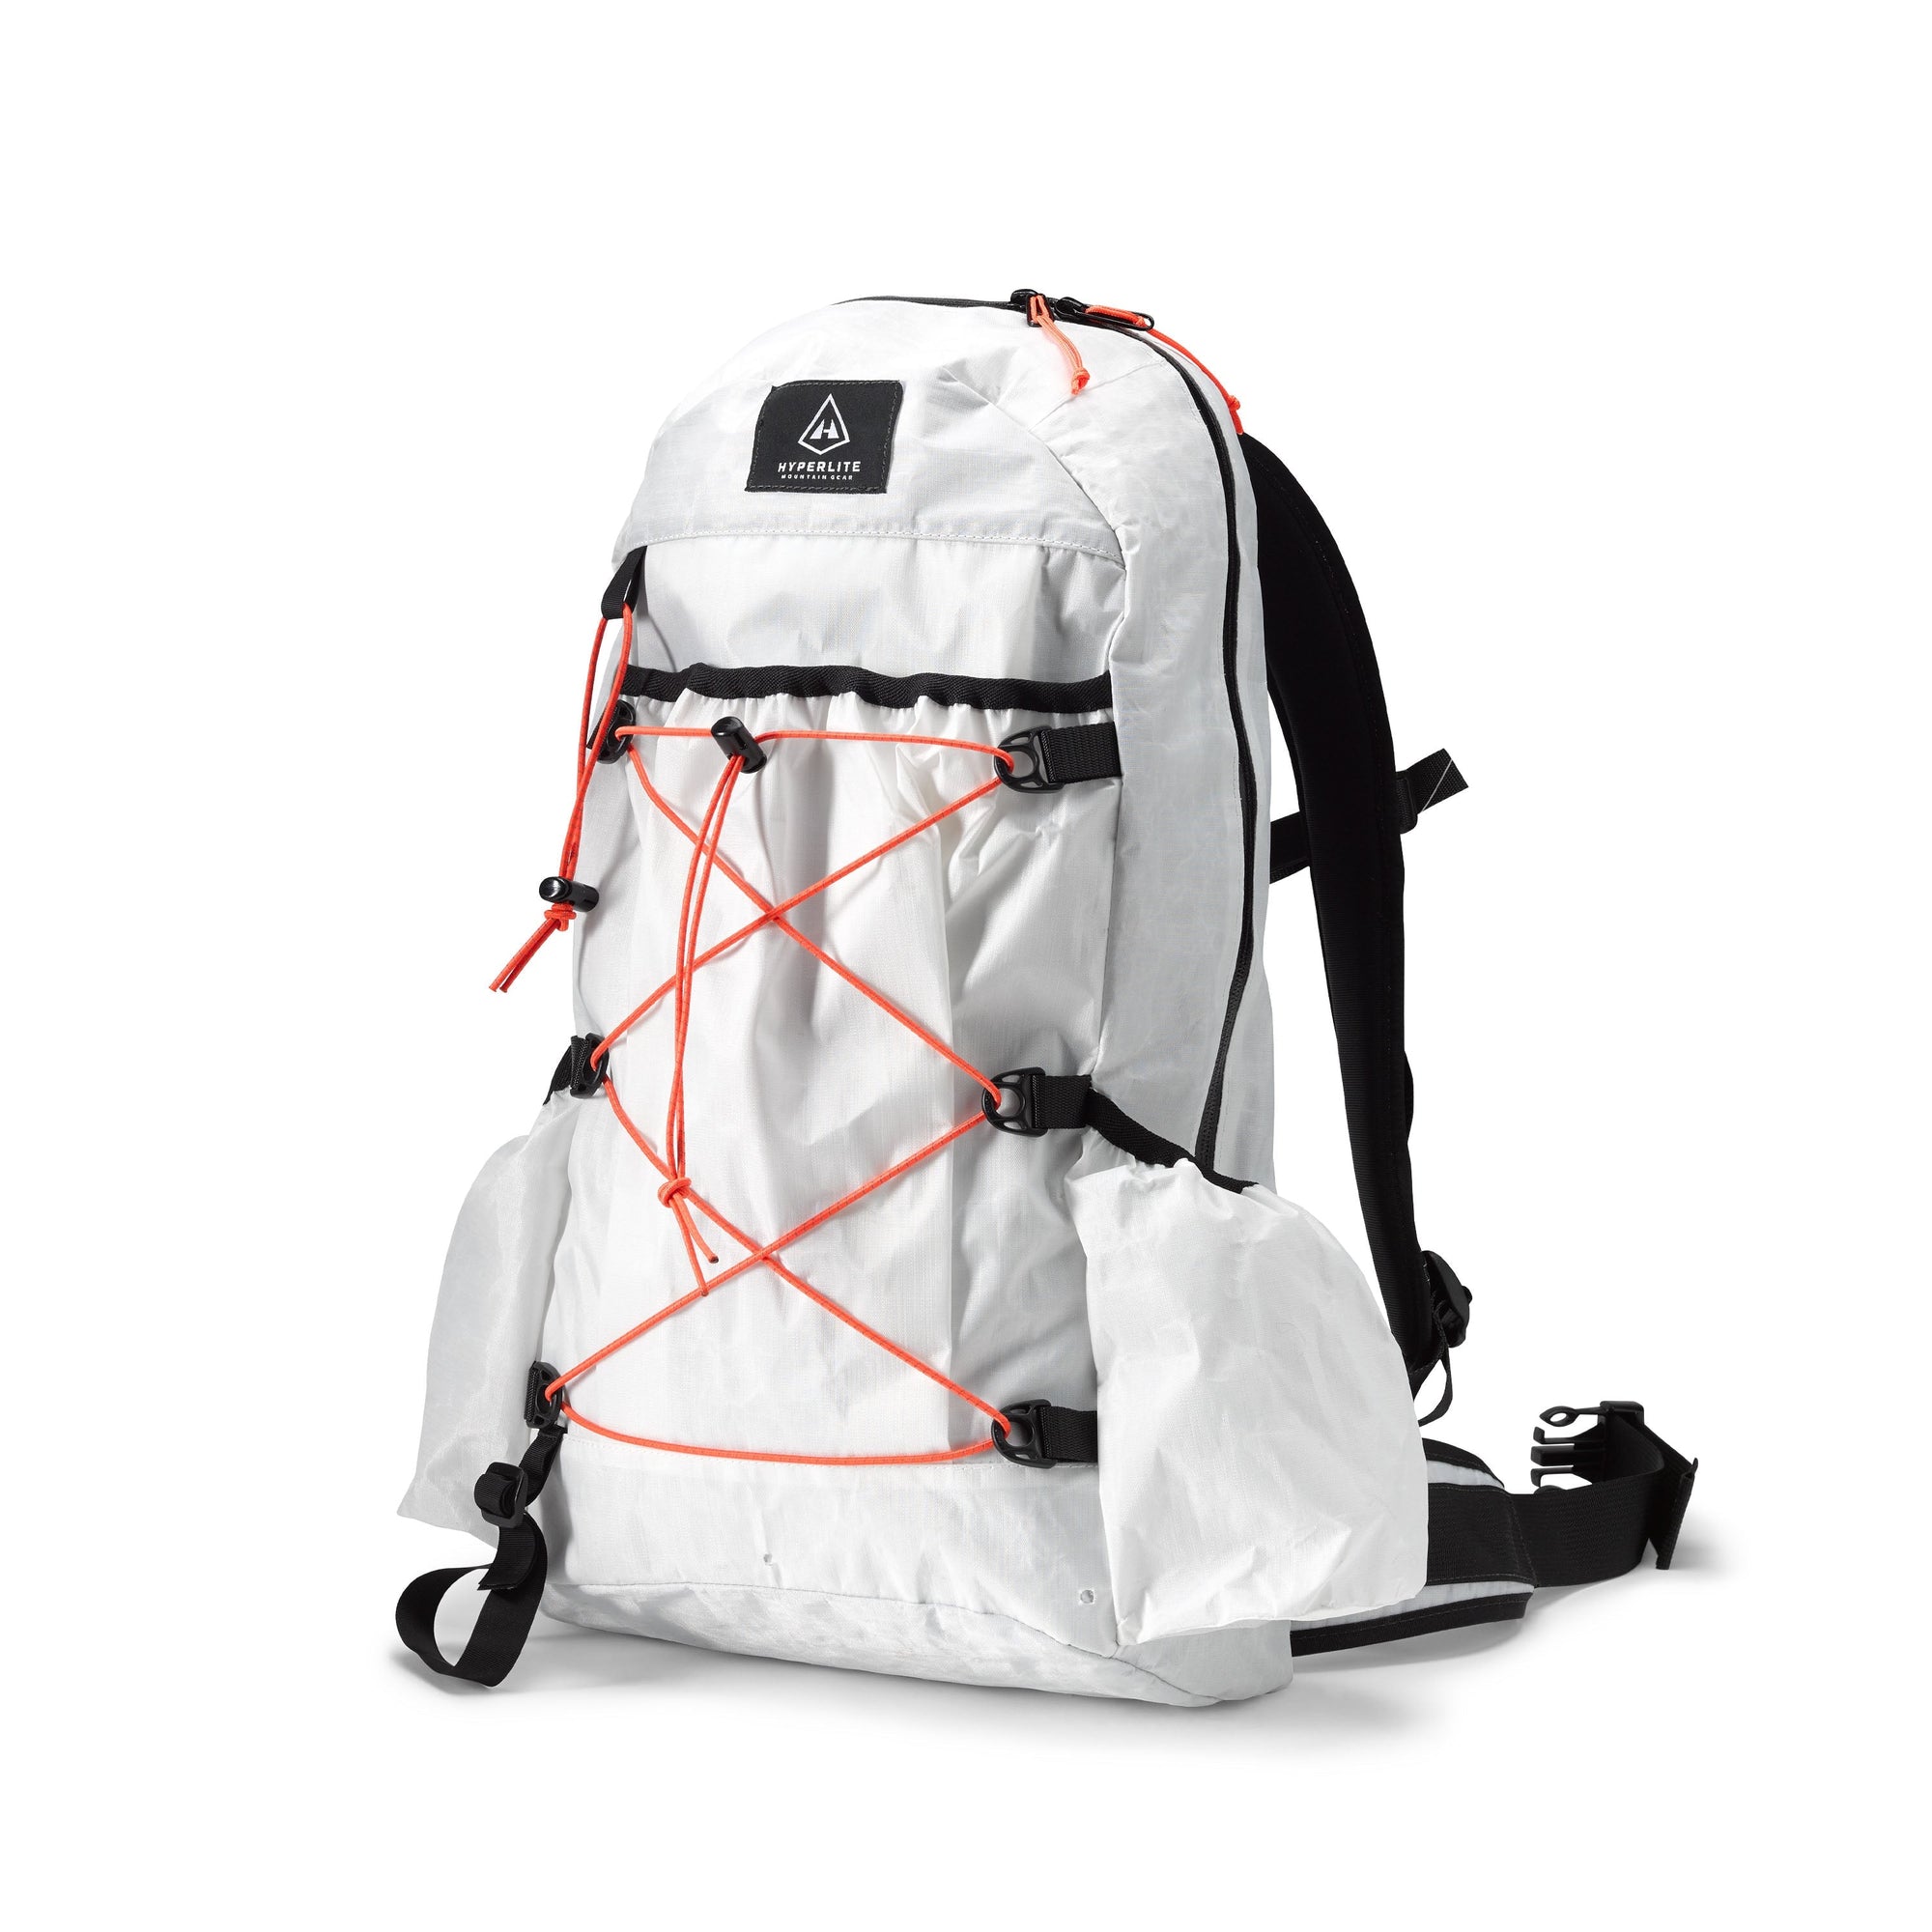 Why Repair your schoolbag? 5 good reasons to act